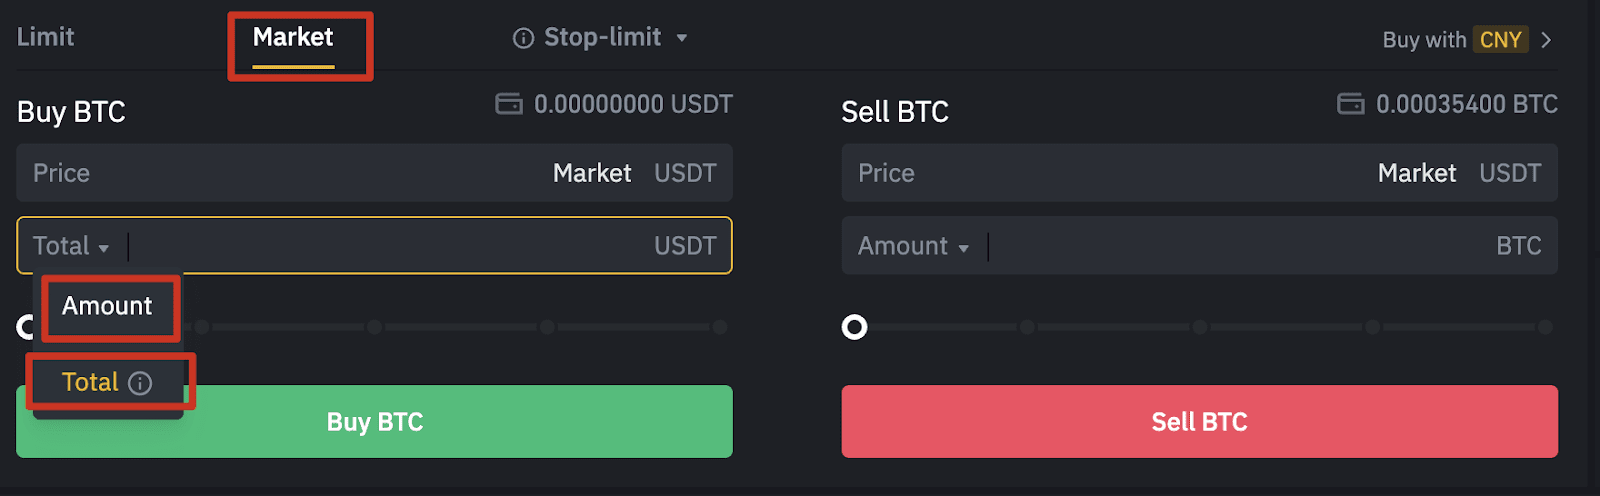 Binance - What Is a Limit Order? » family-gadgets.ru